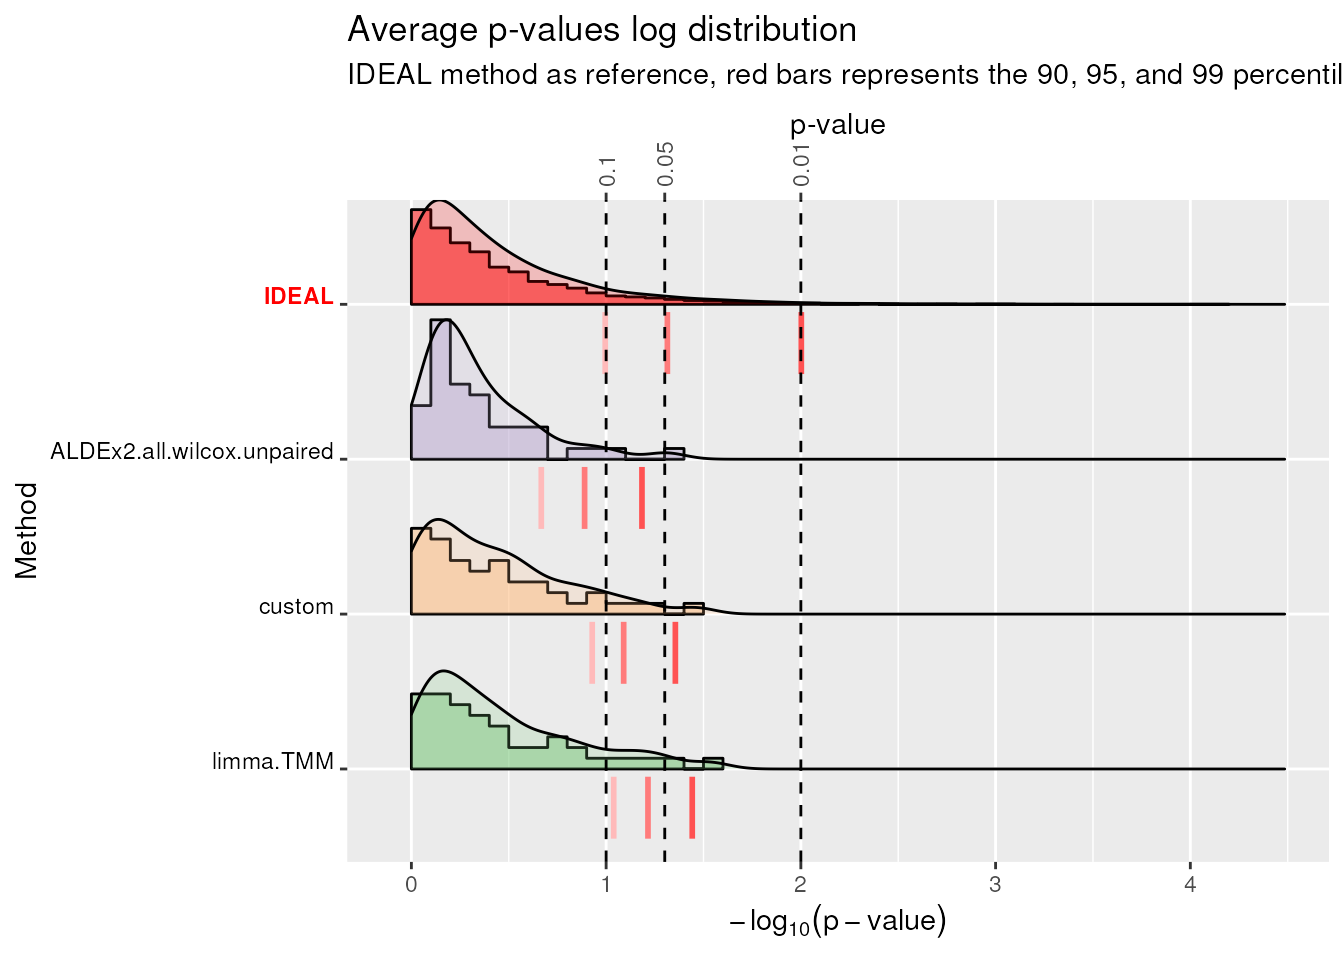 -log10(average p-value) plot ('average' refers to the average p-value computed for each quantile across mocks comparisons). Negative logarithm distribution of average p-values. Red-shaded vertical bars represent the 90, 95, and 99 percentiles for the negative log distribution of average p-values for each method. They should align with the dotted lines which represent the percentiles of the IDEAL distribution.